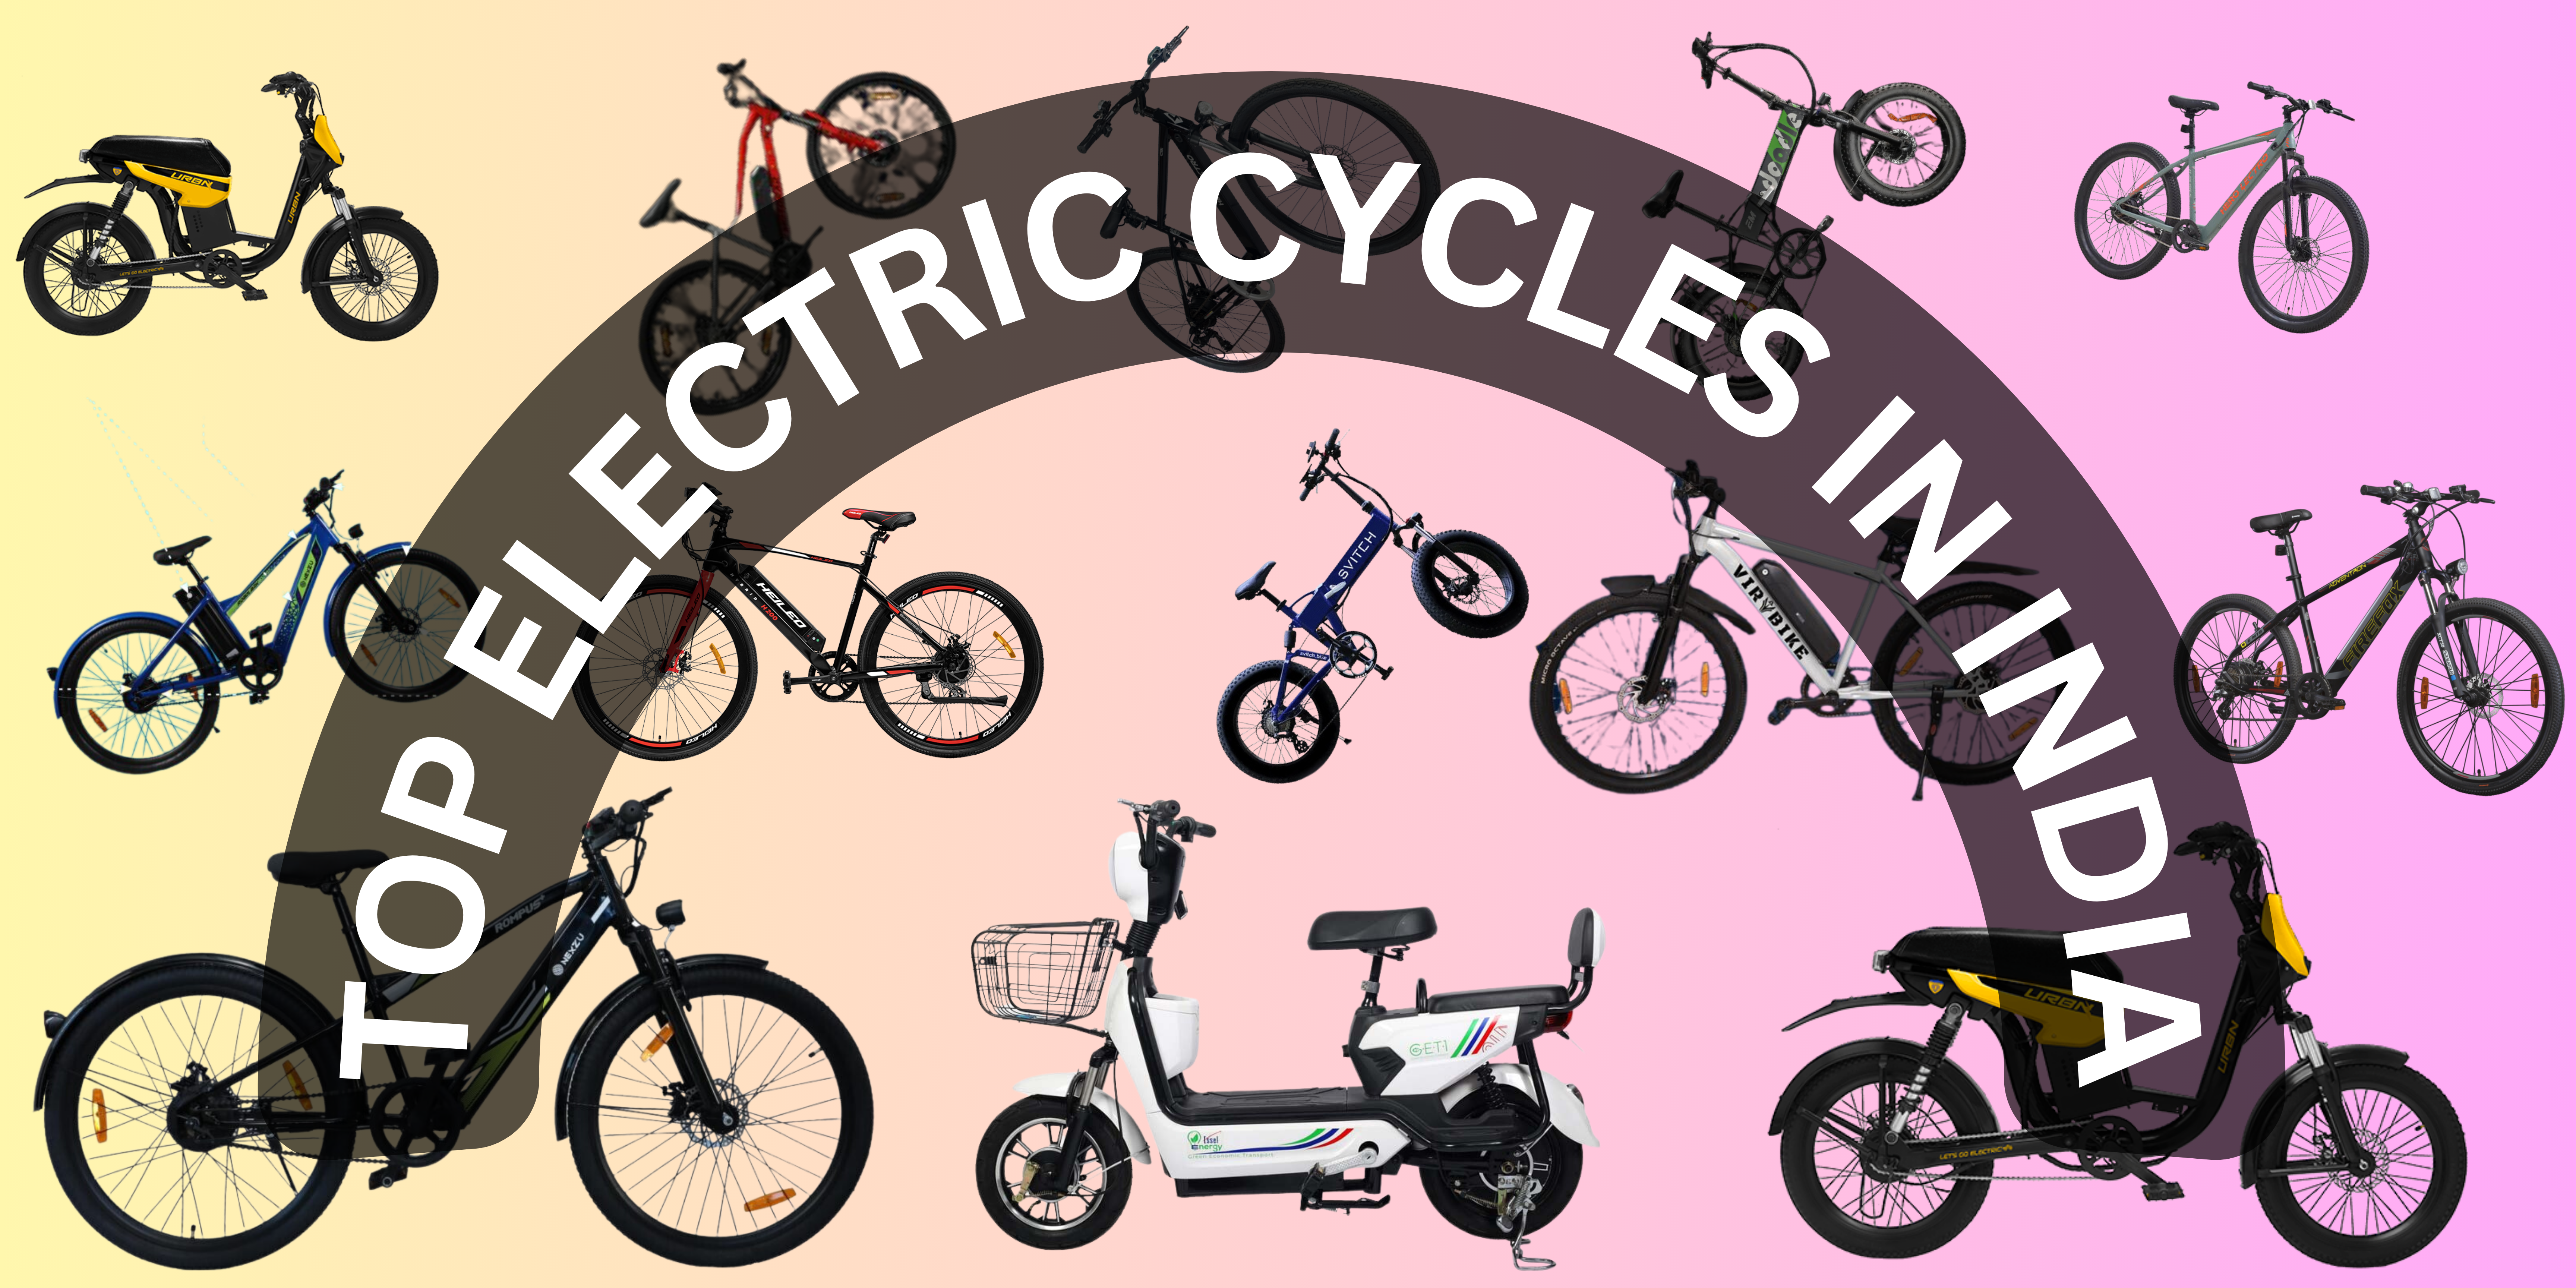 India's Top Electric Cycles